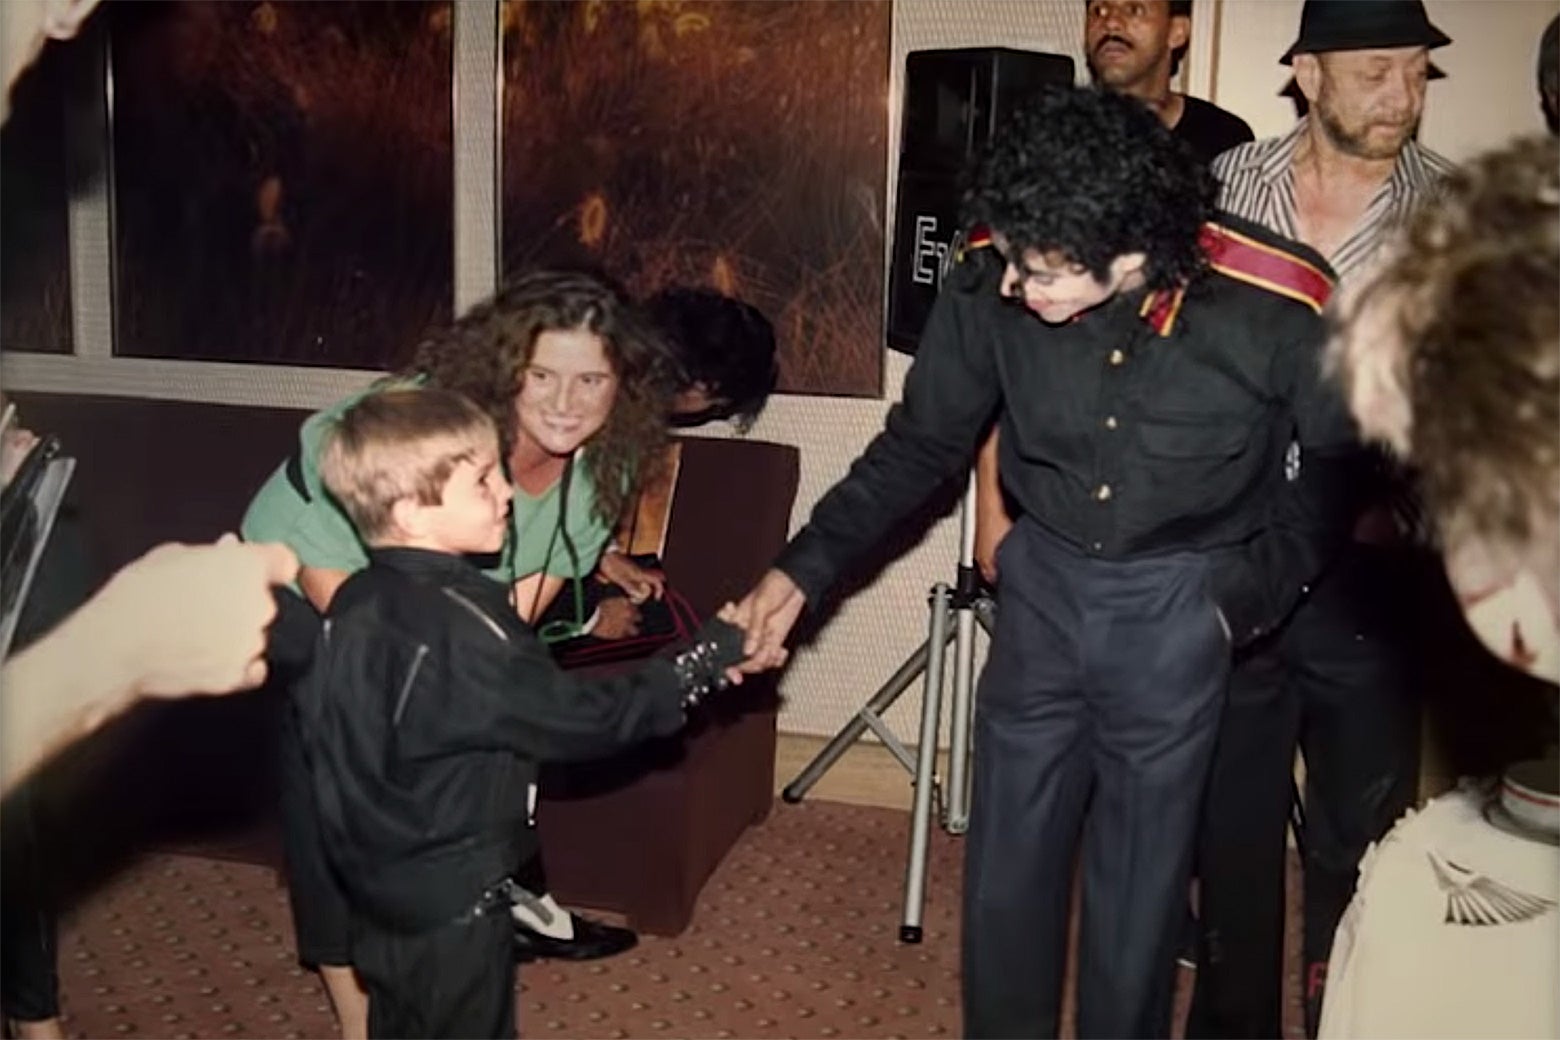 Michael Jackson shaking hands with a young James Safechuck dressed in an outfit inspired by the album Bad.